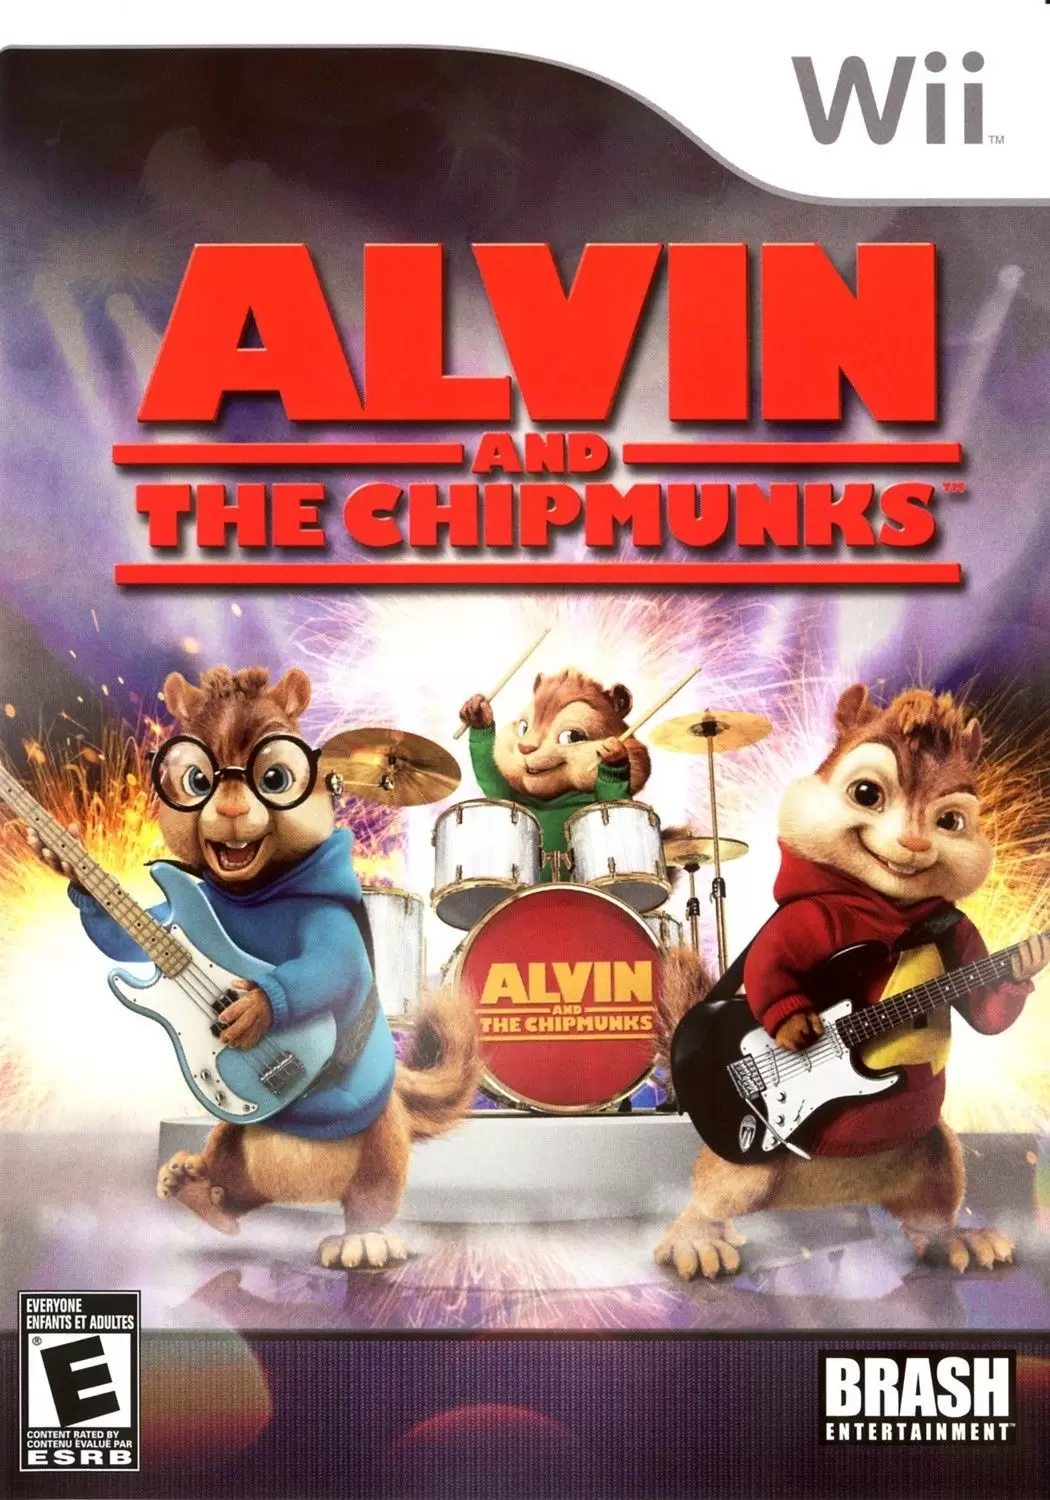 Nintendo Wii Games - Alvin and the Chipmunks